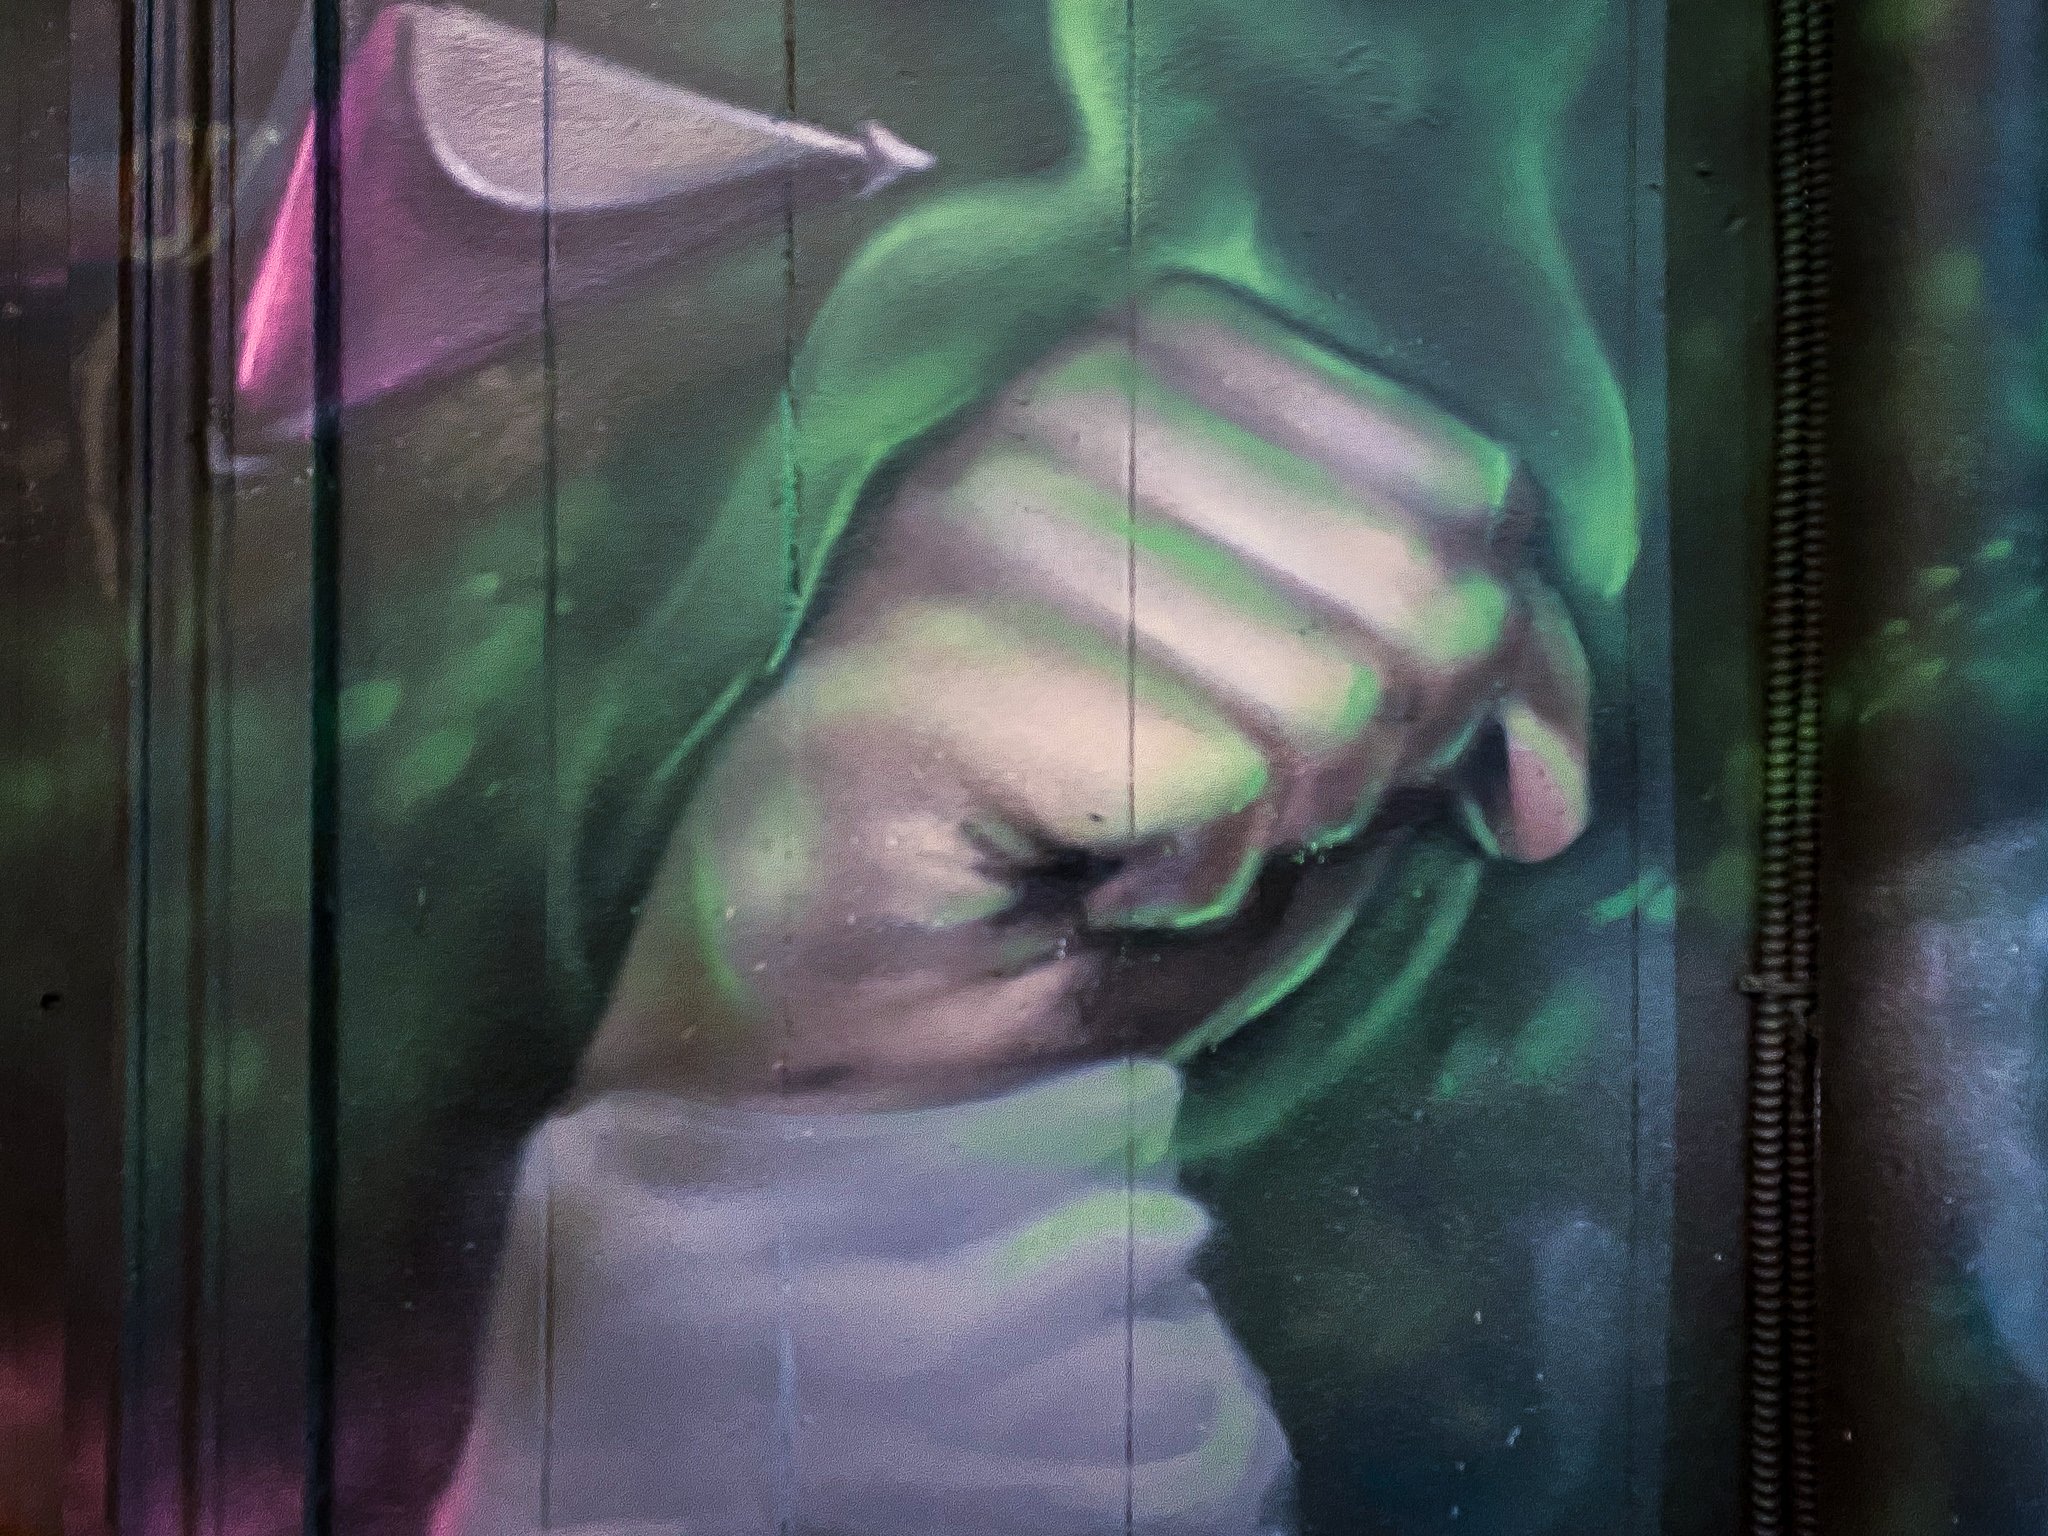   Jordoh -  Spray Paint , as part of the  WestEnd Cannabis  Collection of Art 